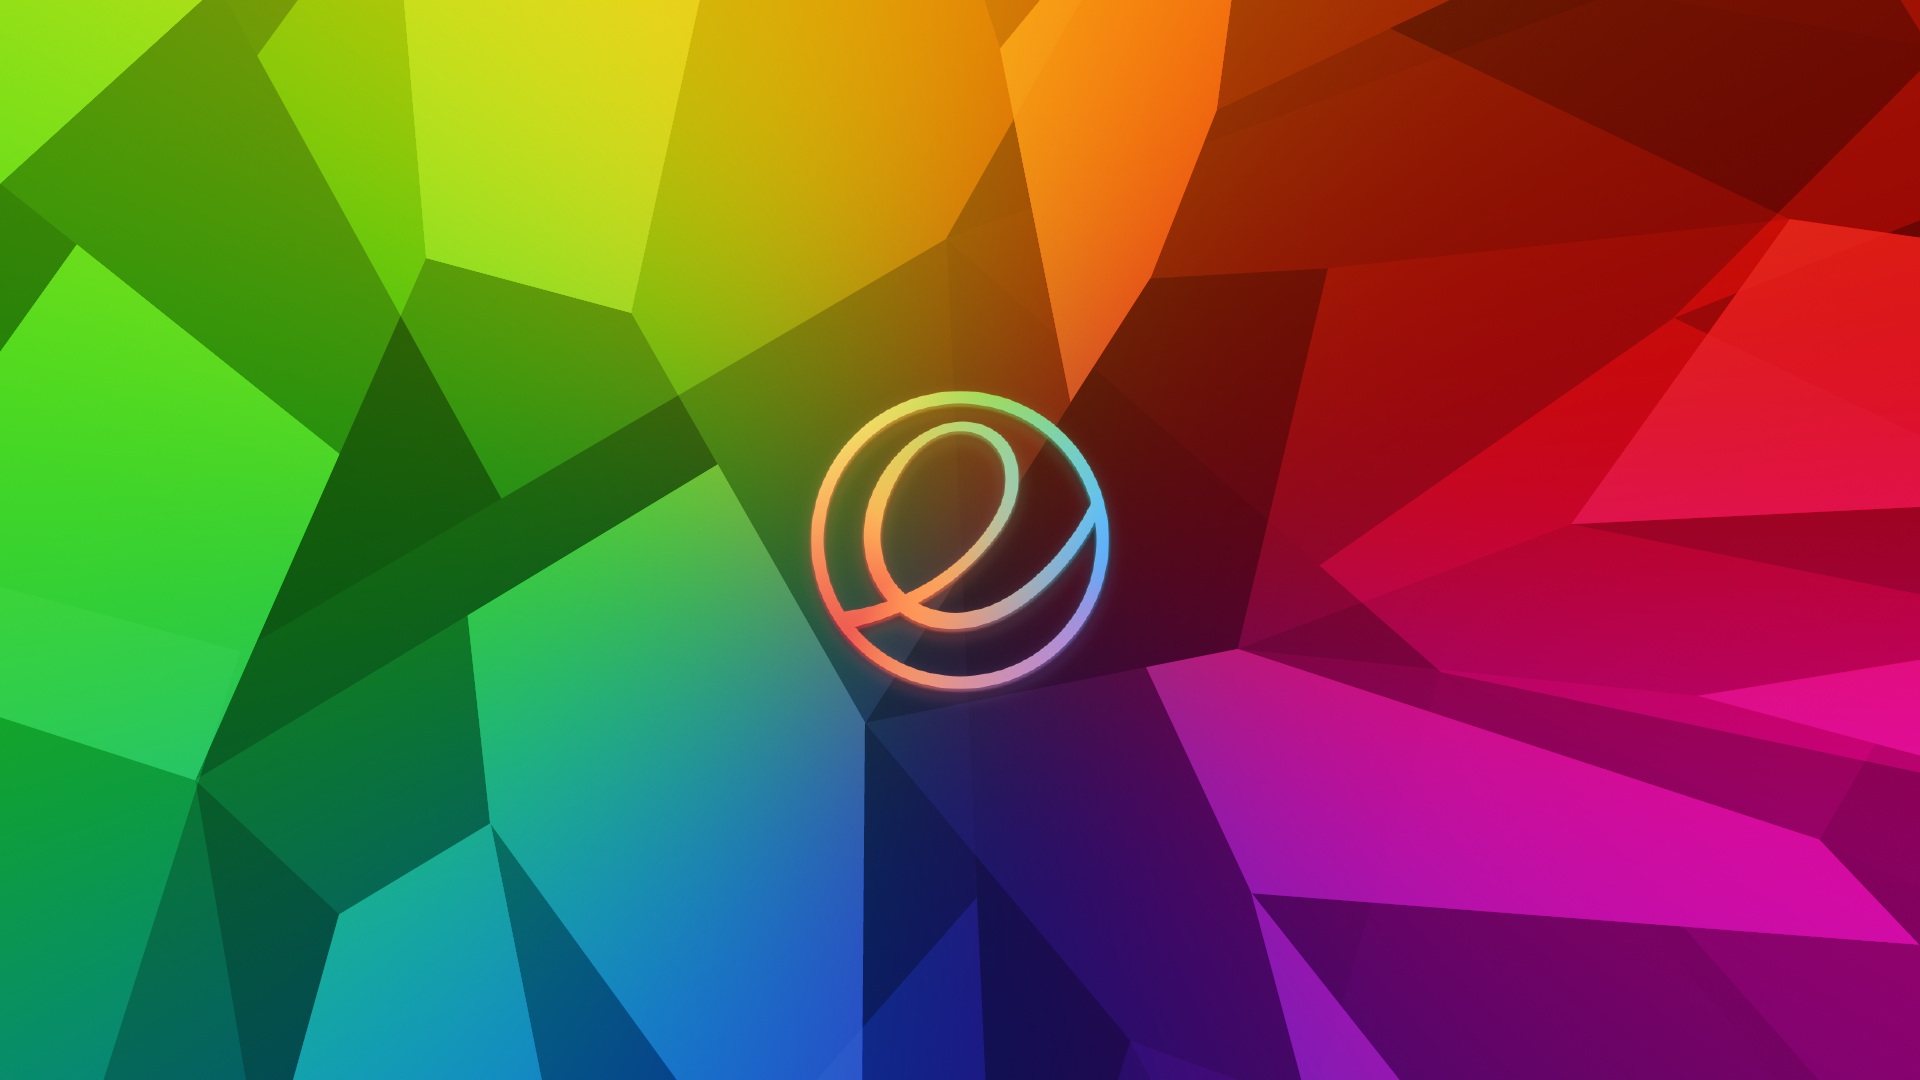 Digital Digital Art Geometry Abstract Colorful Elementary OS Linux Operating System Logo 1920x1080